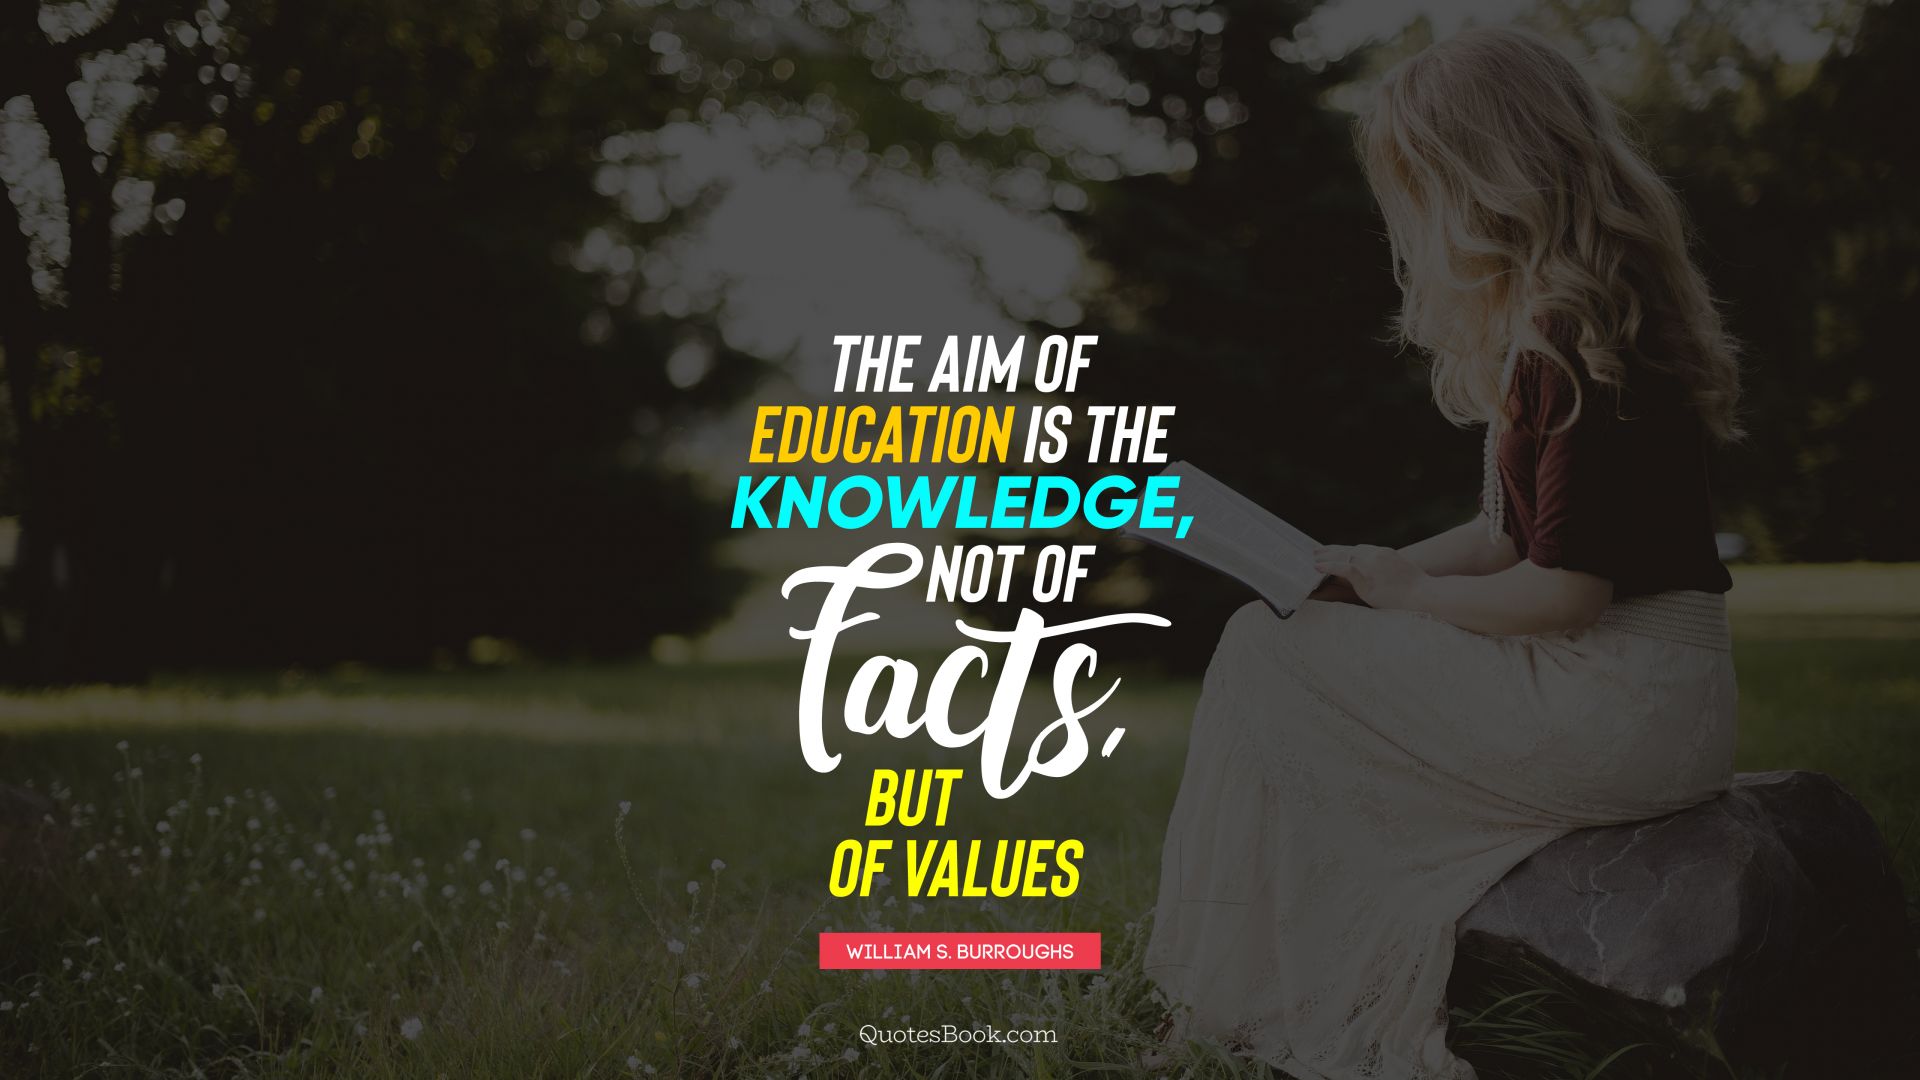 The aim of education is the knowledge, not of facts, but of values. - Quote by William S. Burroughs